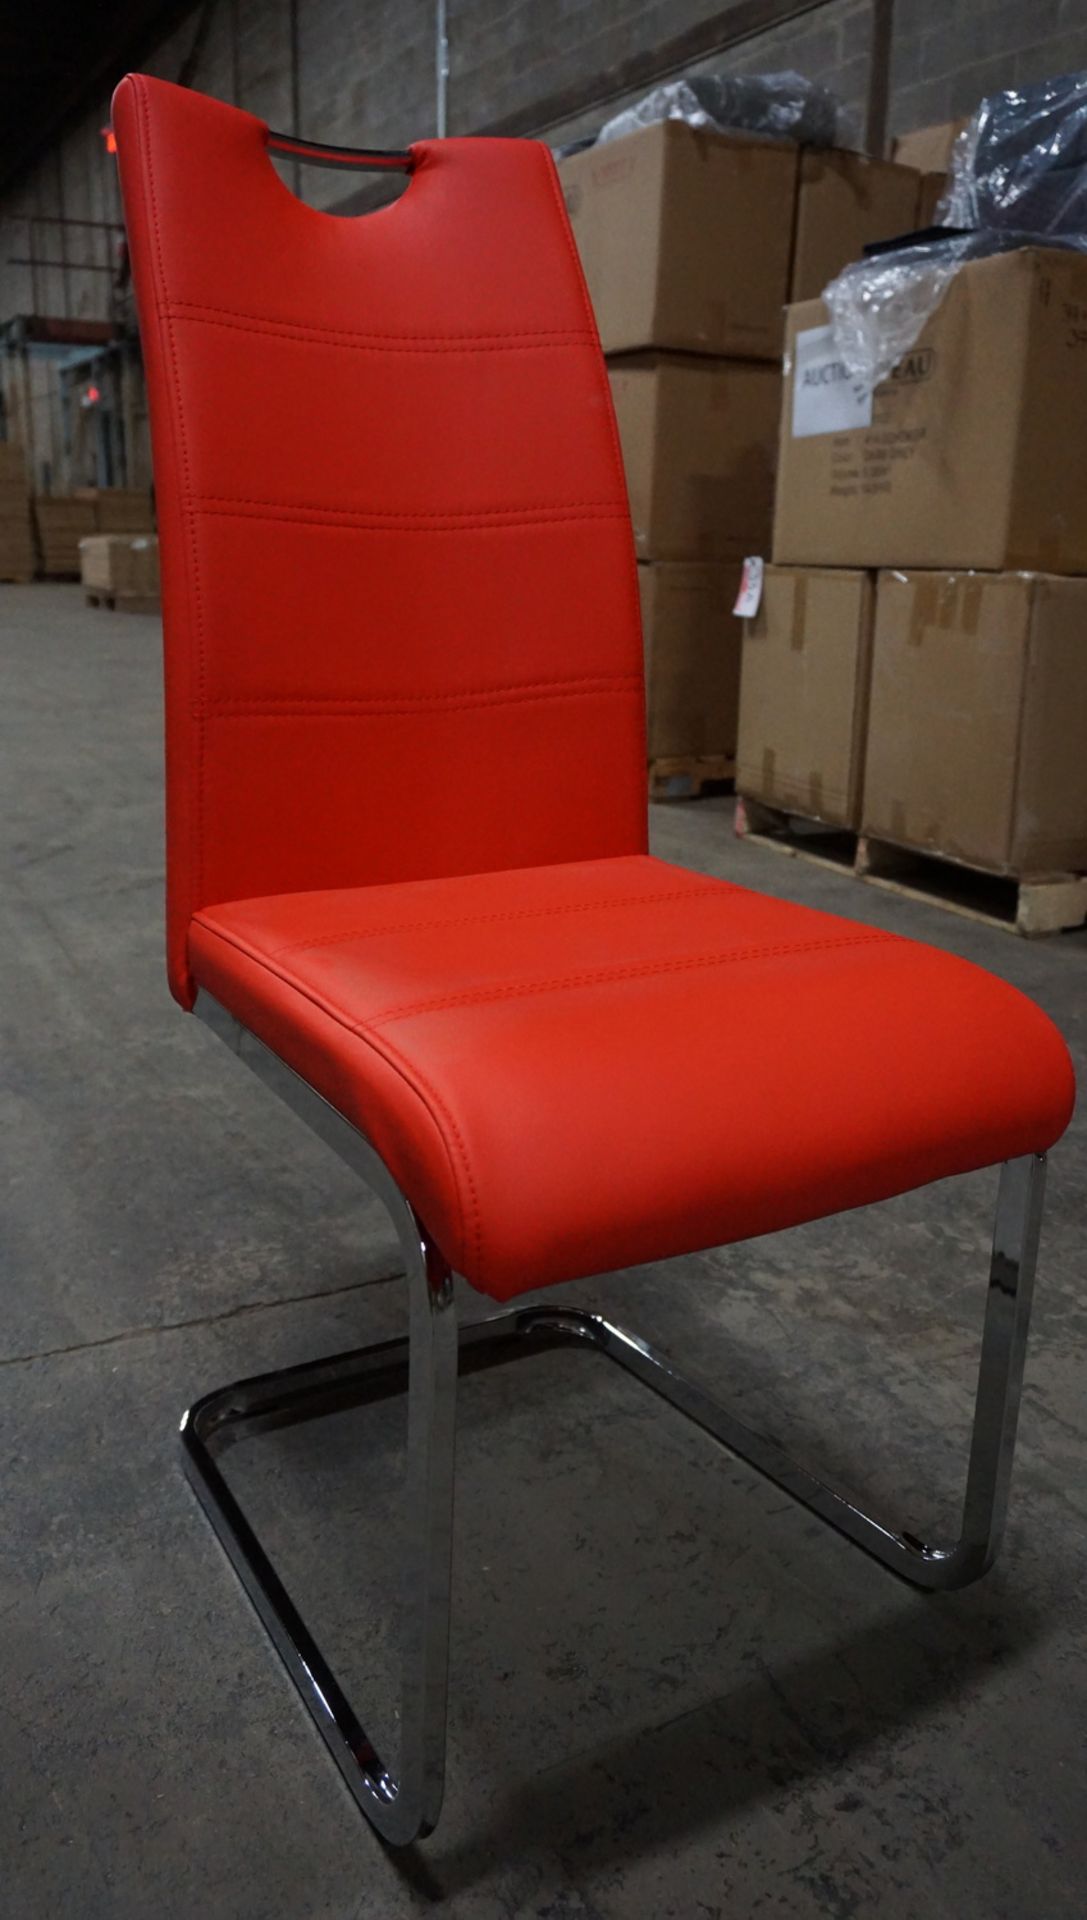 UNITS - RED PU LEATHER DINING CHAIRS W/ CHROME BASE (6353-2CHRE) (IN BOX)